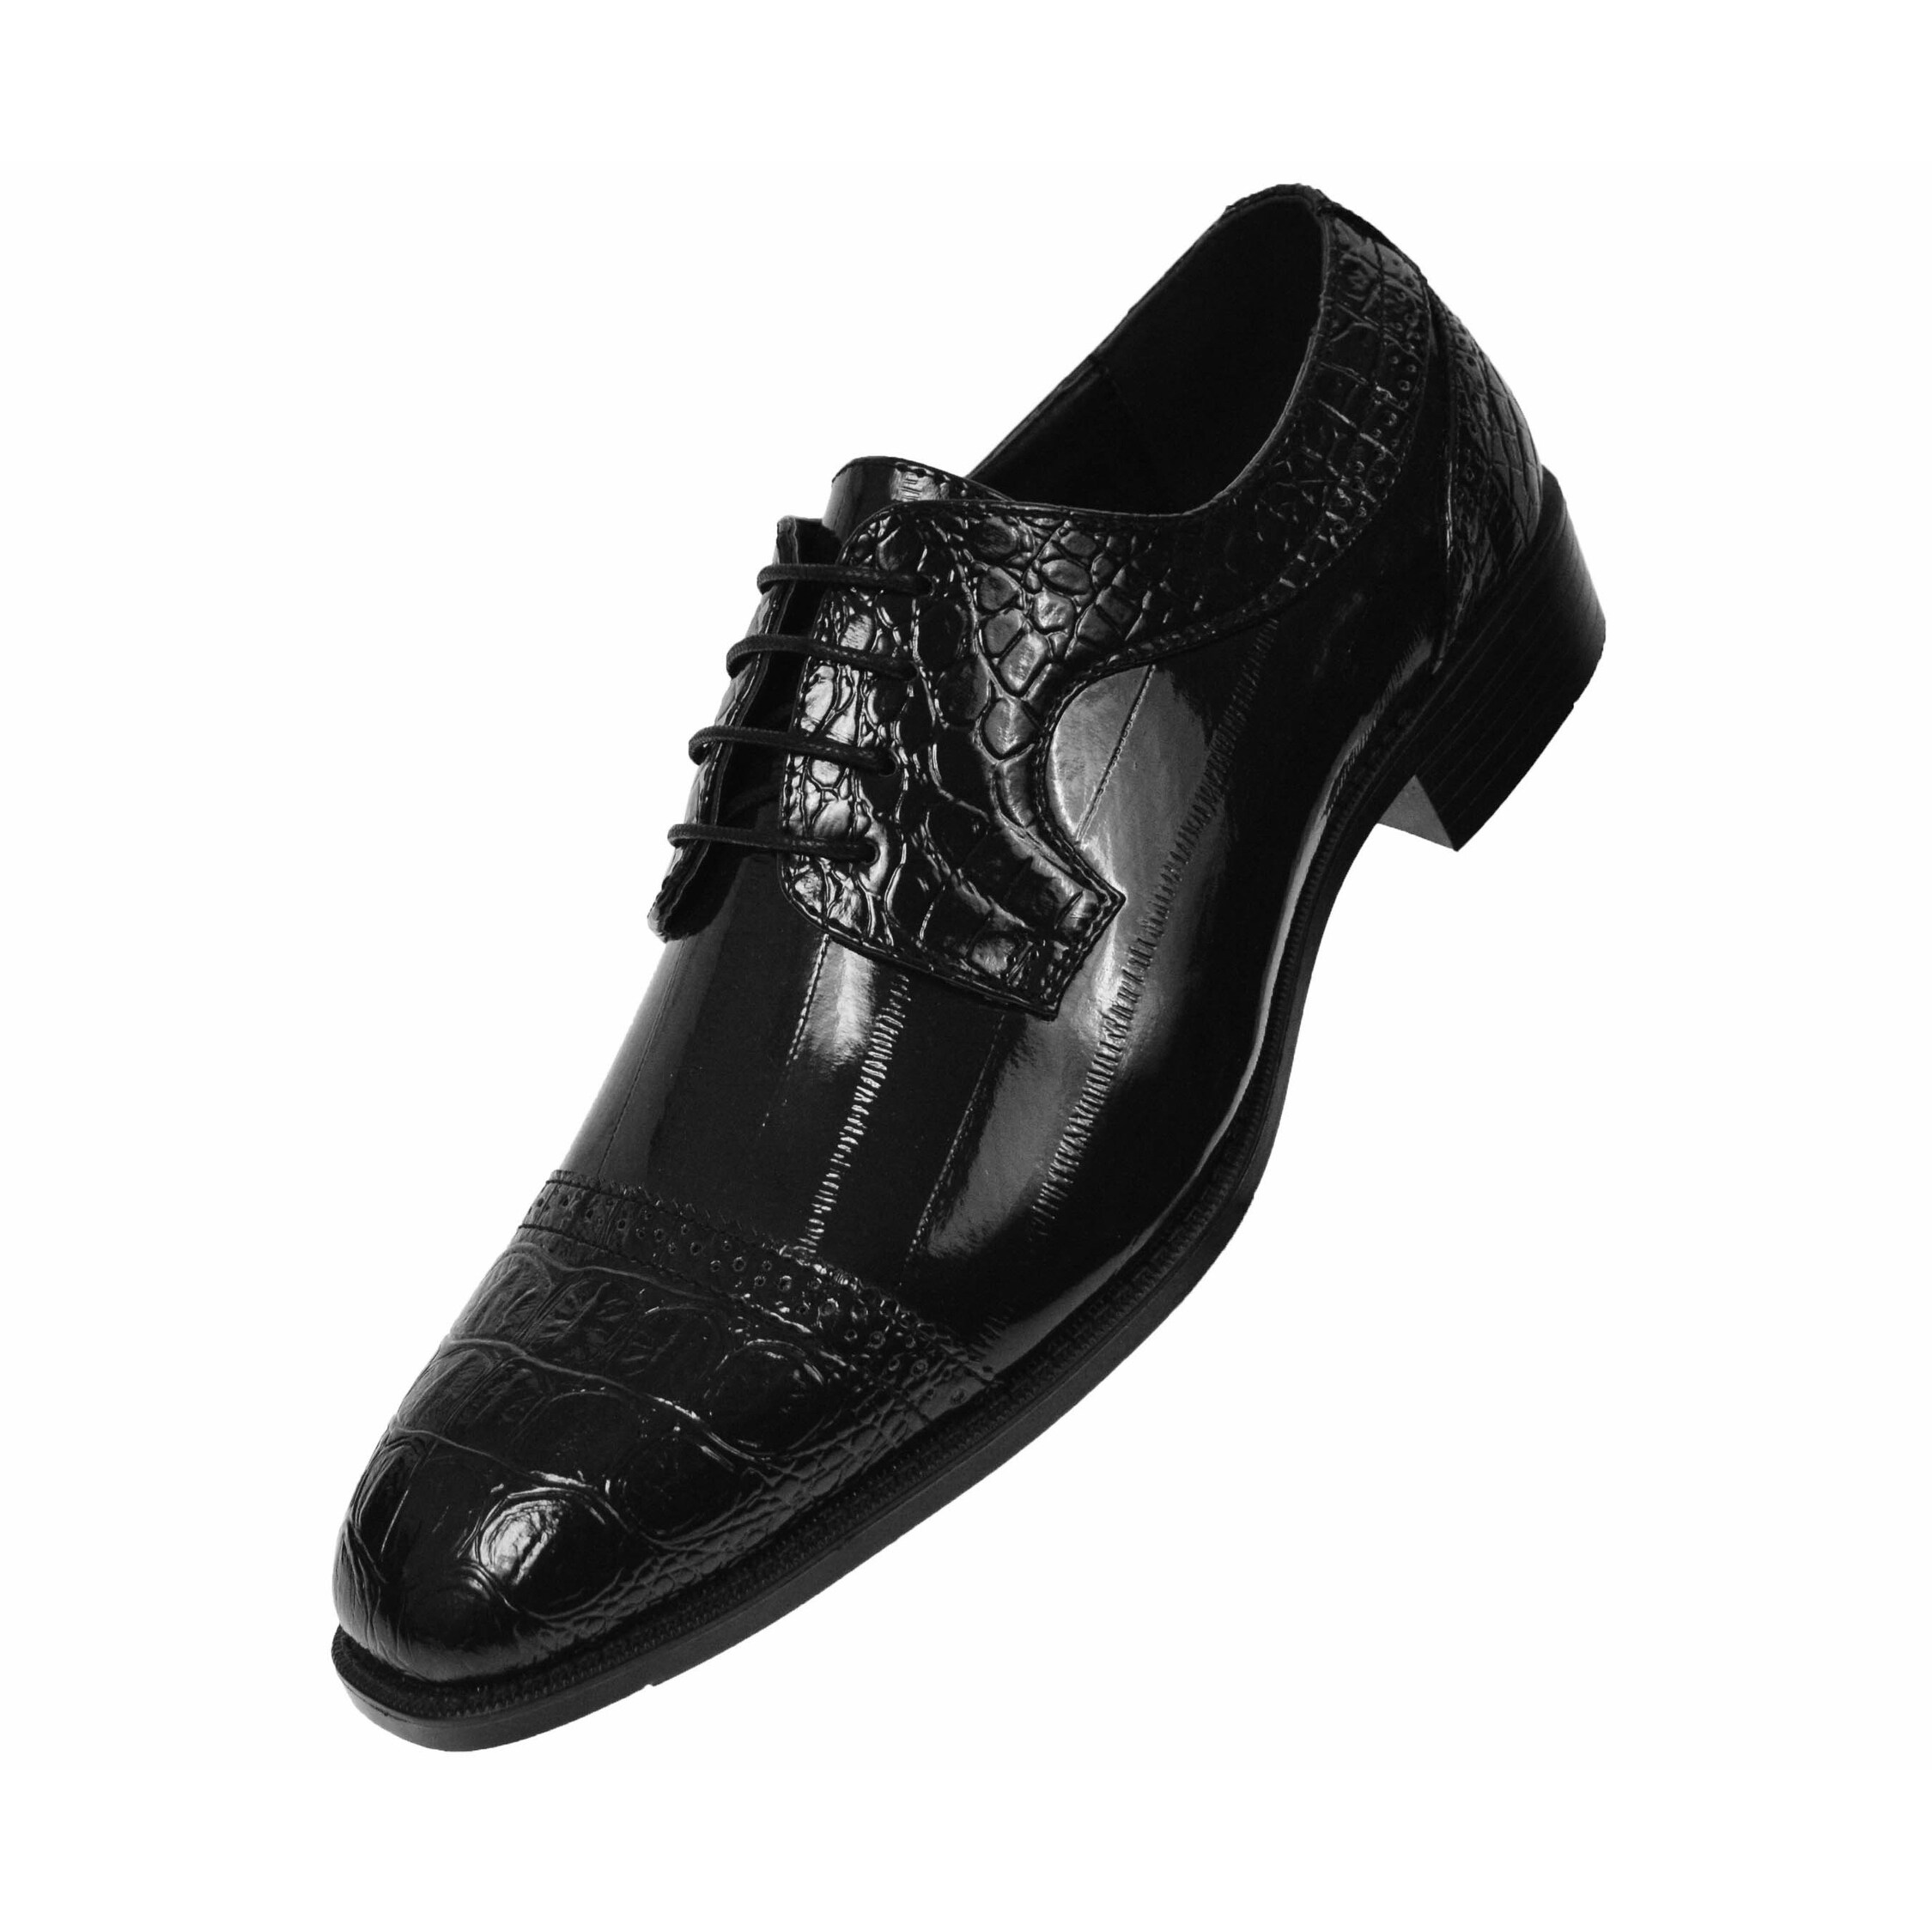 exotic dress shoes